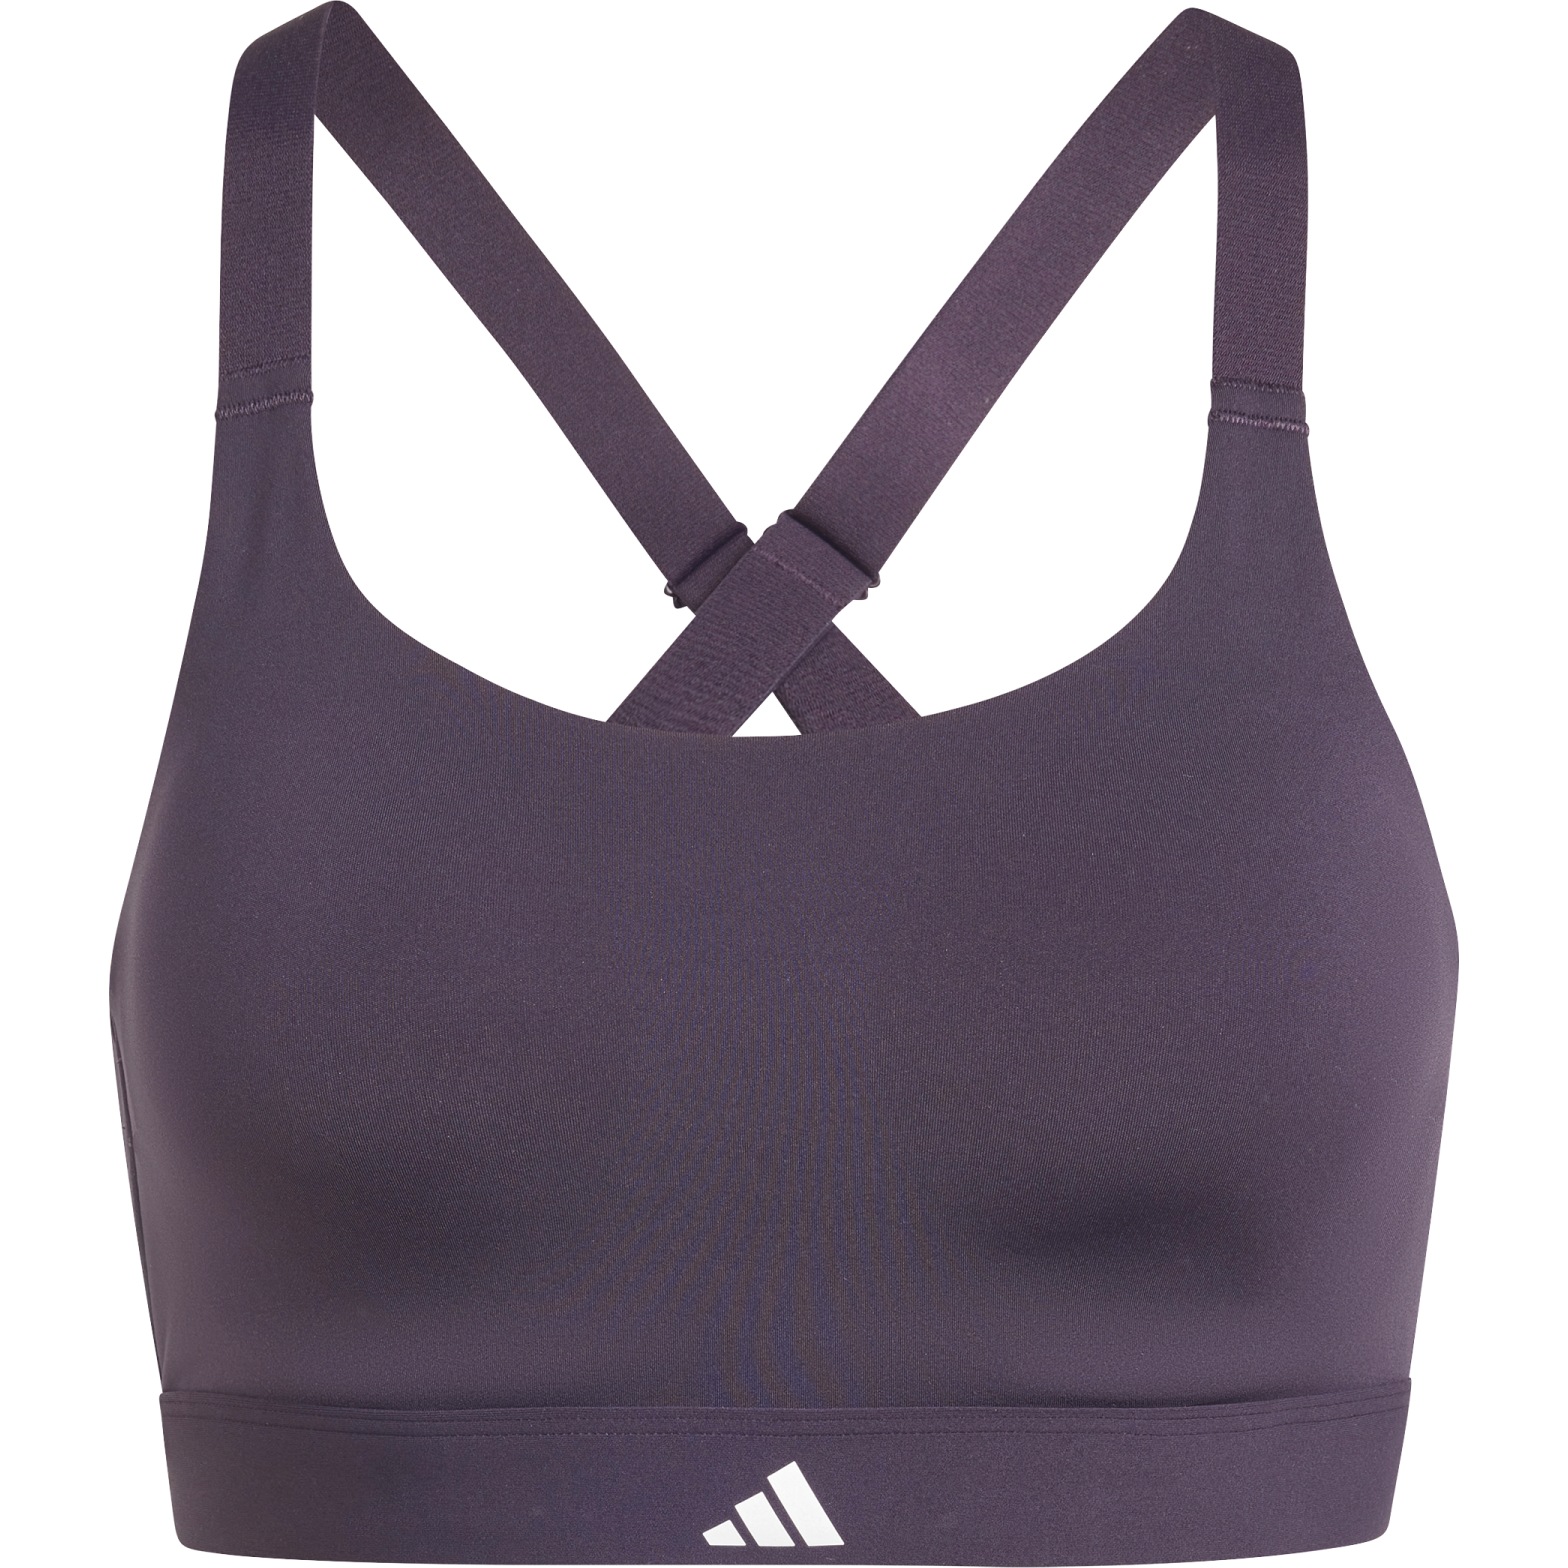 Picture of adidas TLRD Impact Luxe Training High Support Sports Bra Women - Cup size C-D - aurora black IT6660